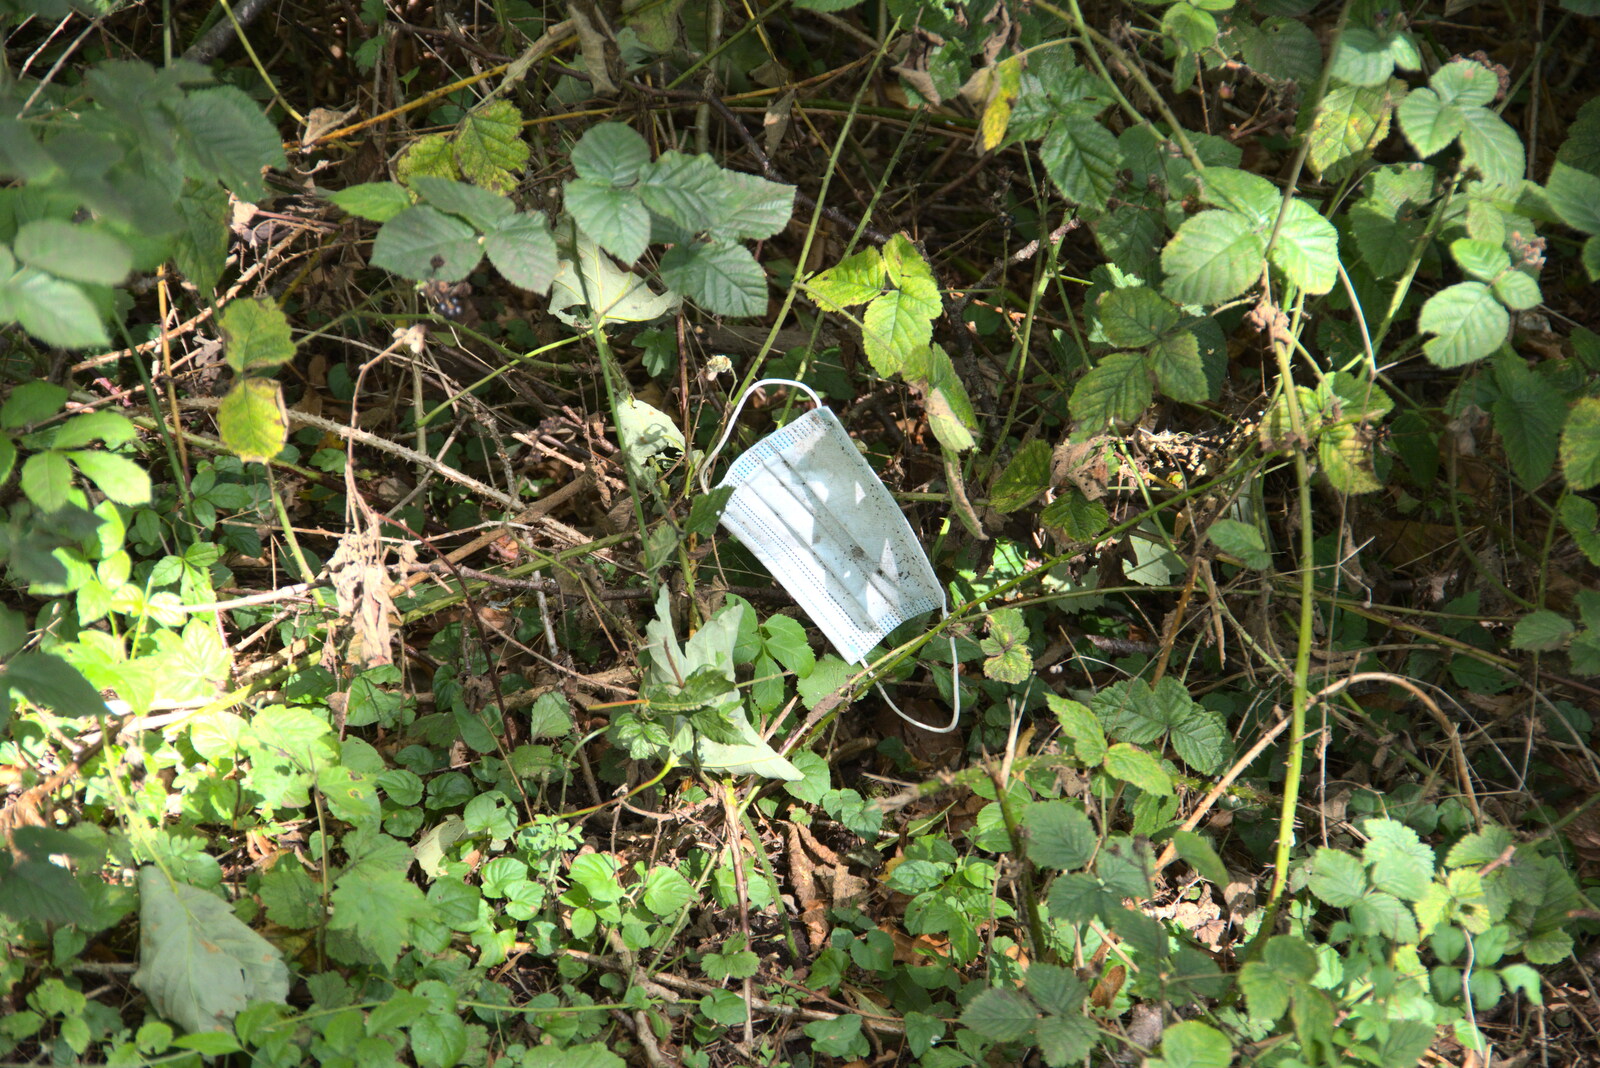 The new Covid waste: a discarded face mask from Stone Circles: Stonehenge and Avebury, Wiltshire - 22nd August 2020